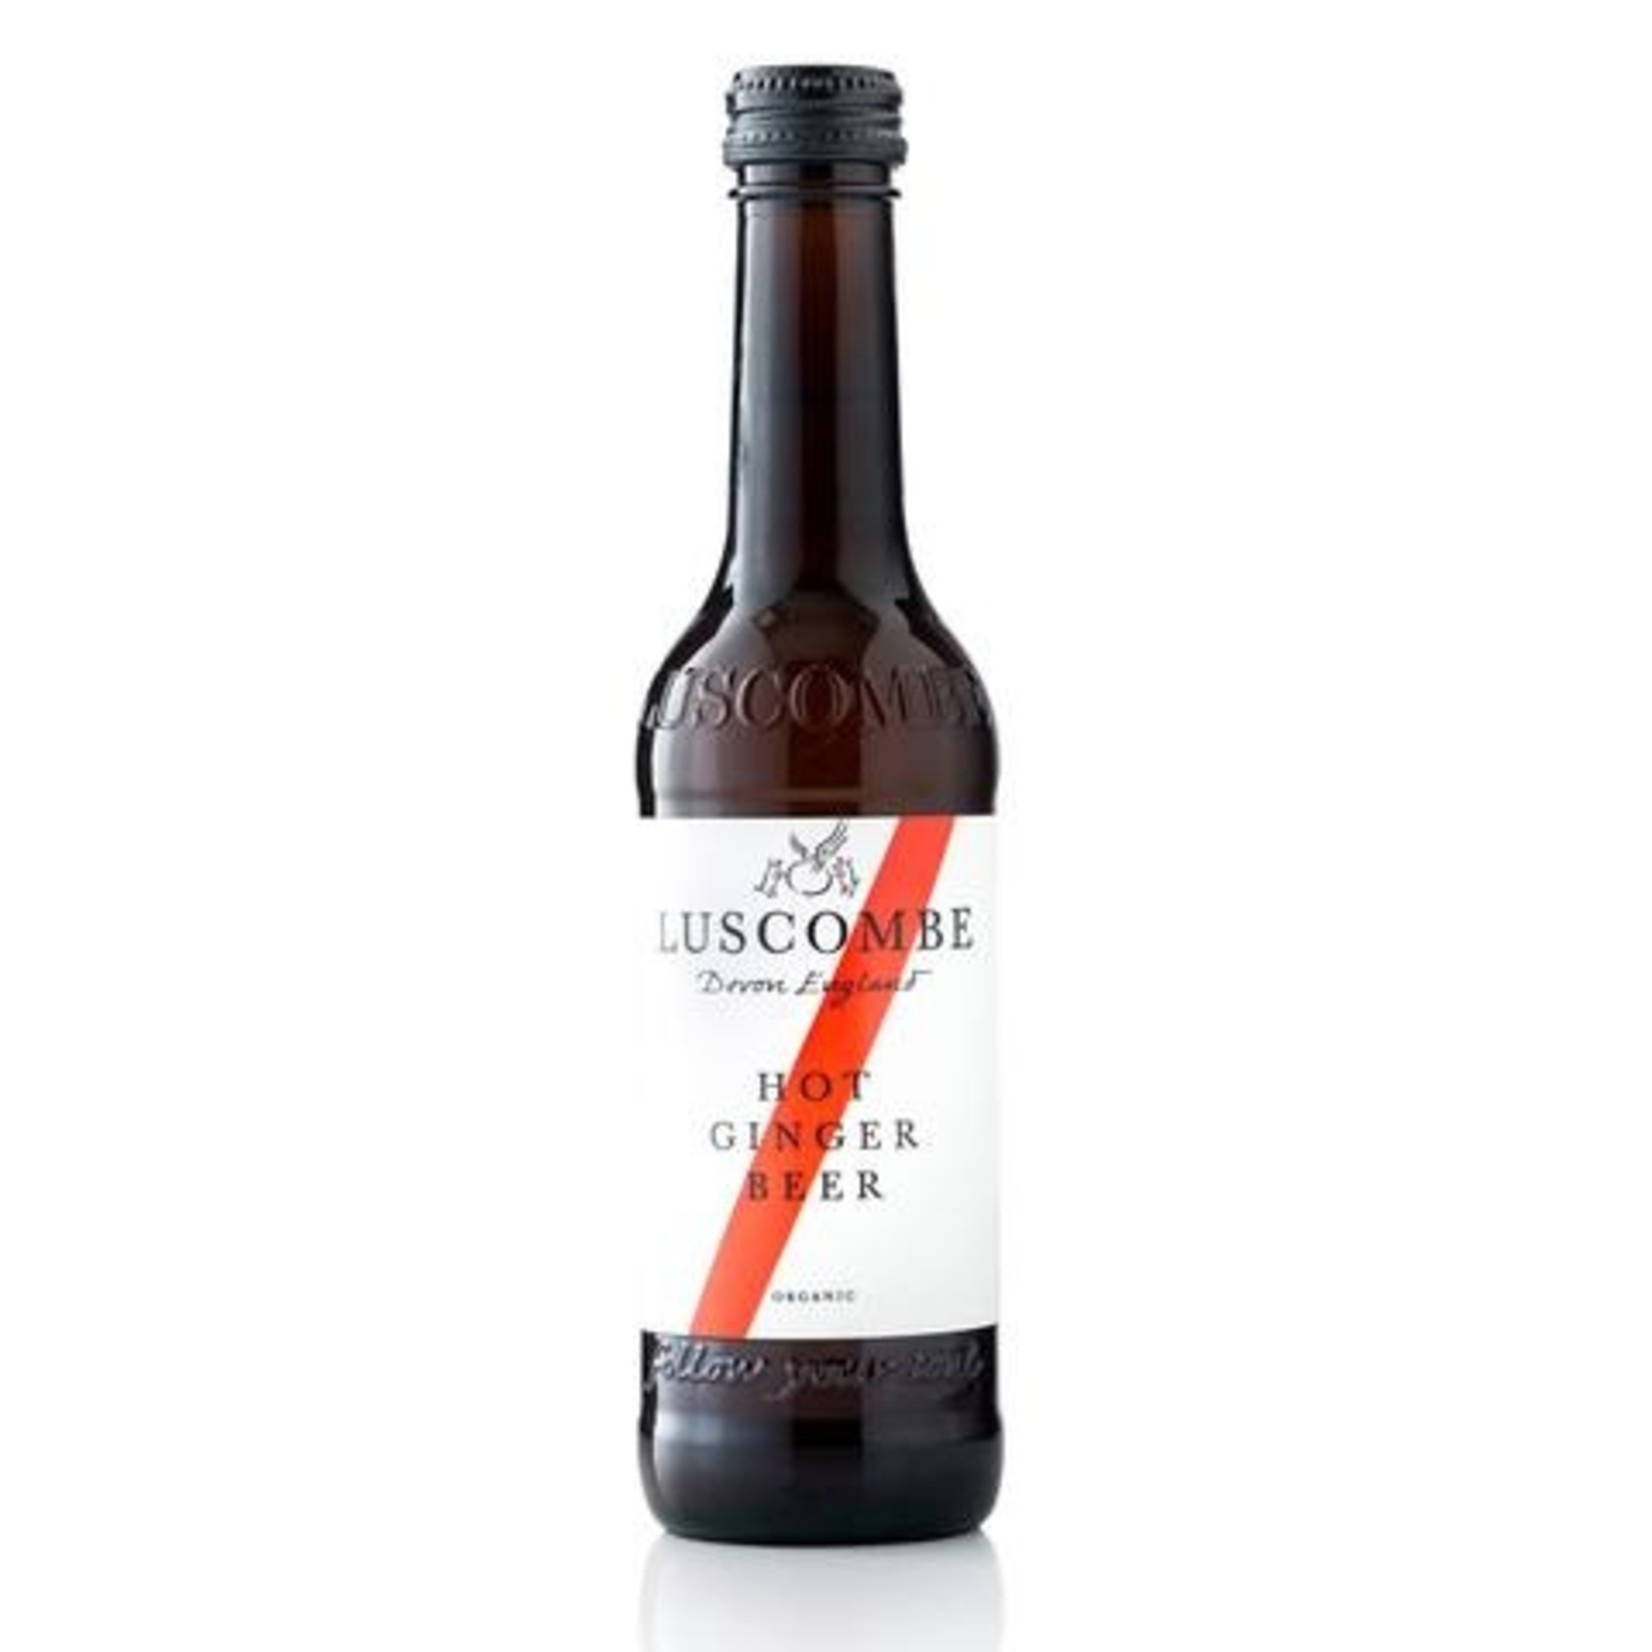 Luscombe ginger beer